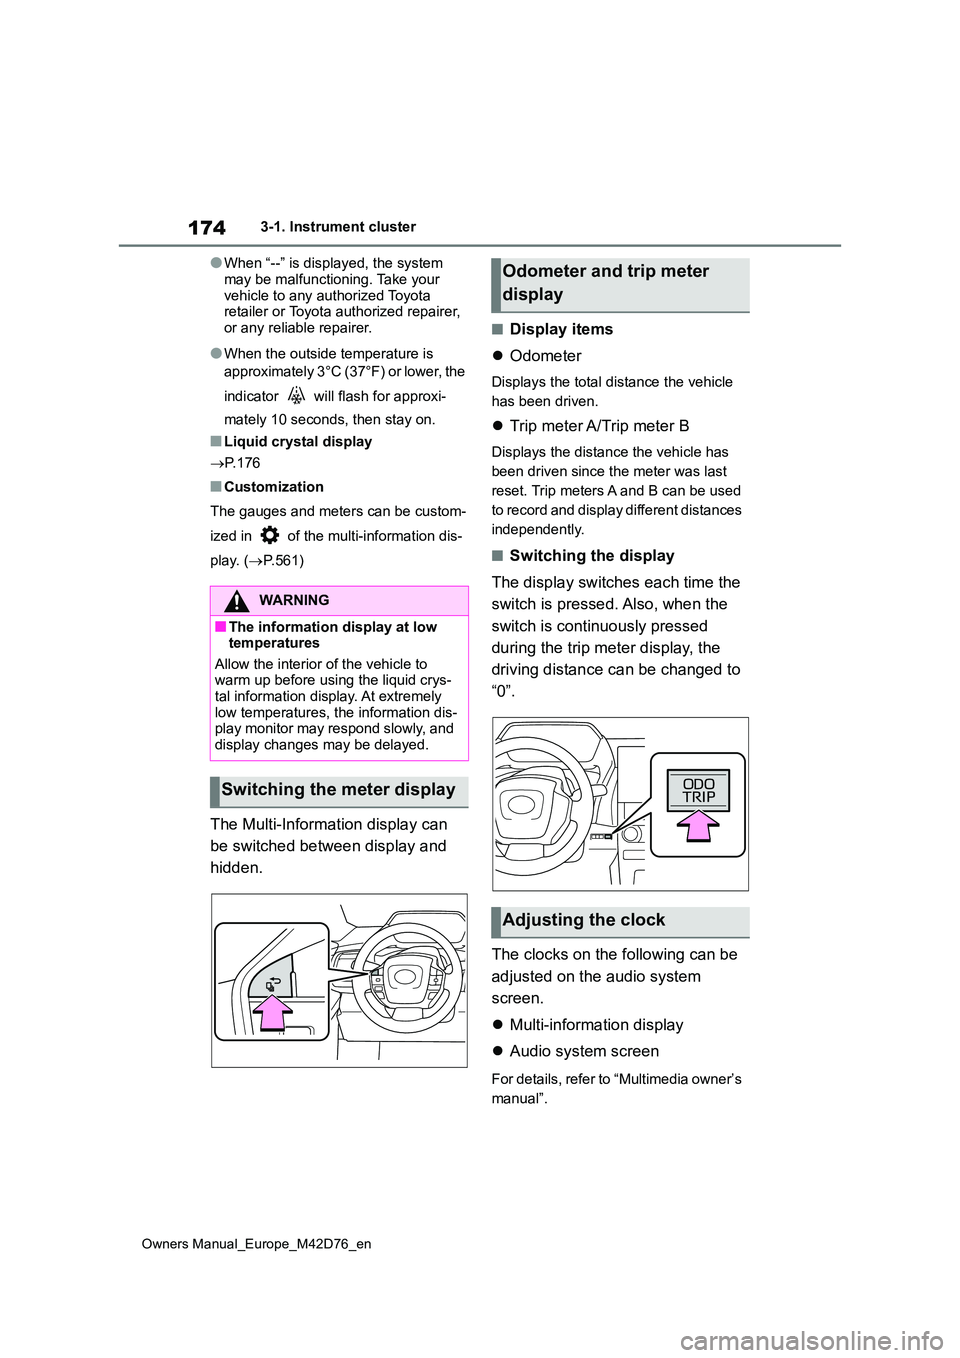 TOYOTA BZ4X 2022  Owners Manual (in English) 174
Owners Manual_Europe_M42D76_en
3-1. Instrument cluster
●When “--” is displayed, the system  
may be malfunctioning. Take your  vehicle to any authorized Toyota retailer or Toyota authorized 